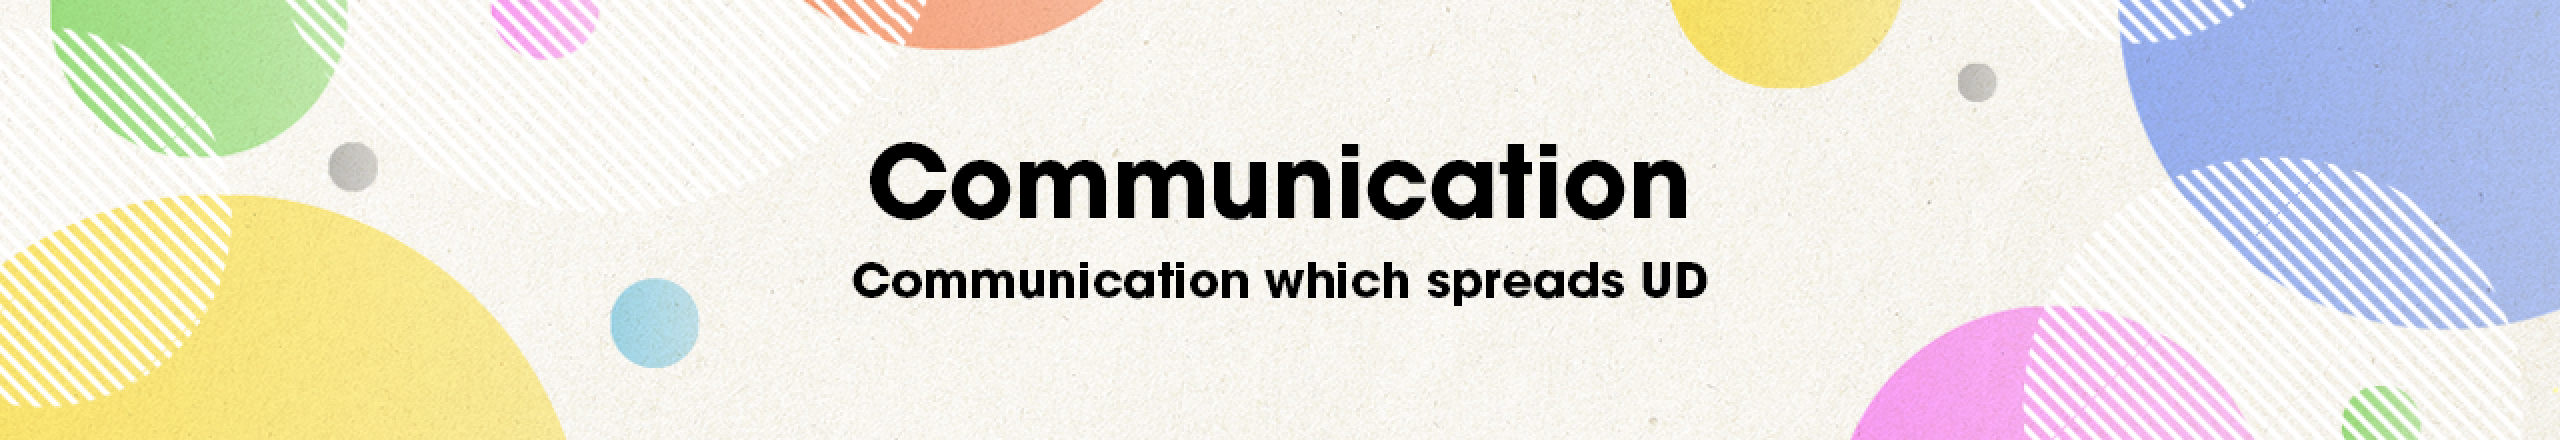 Communication Communication which spreads UD